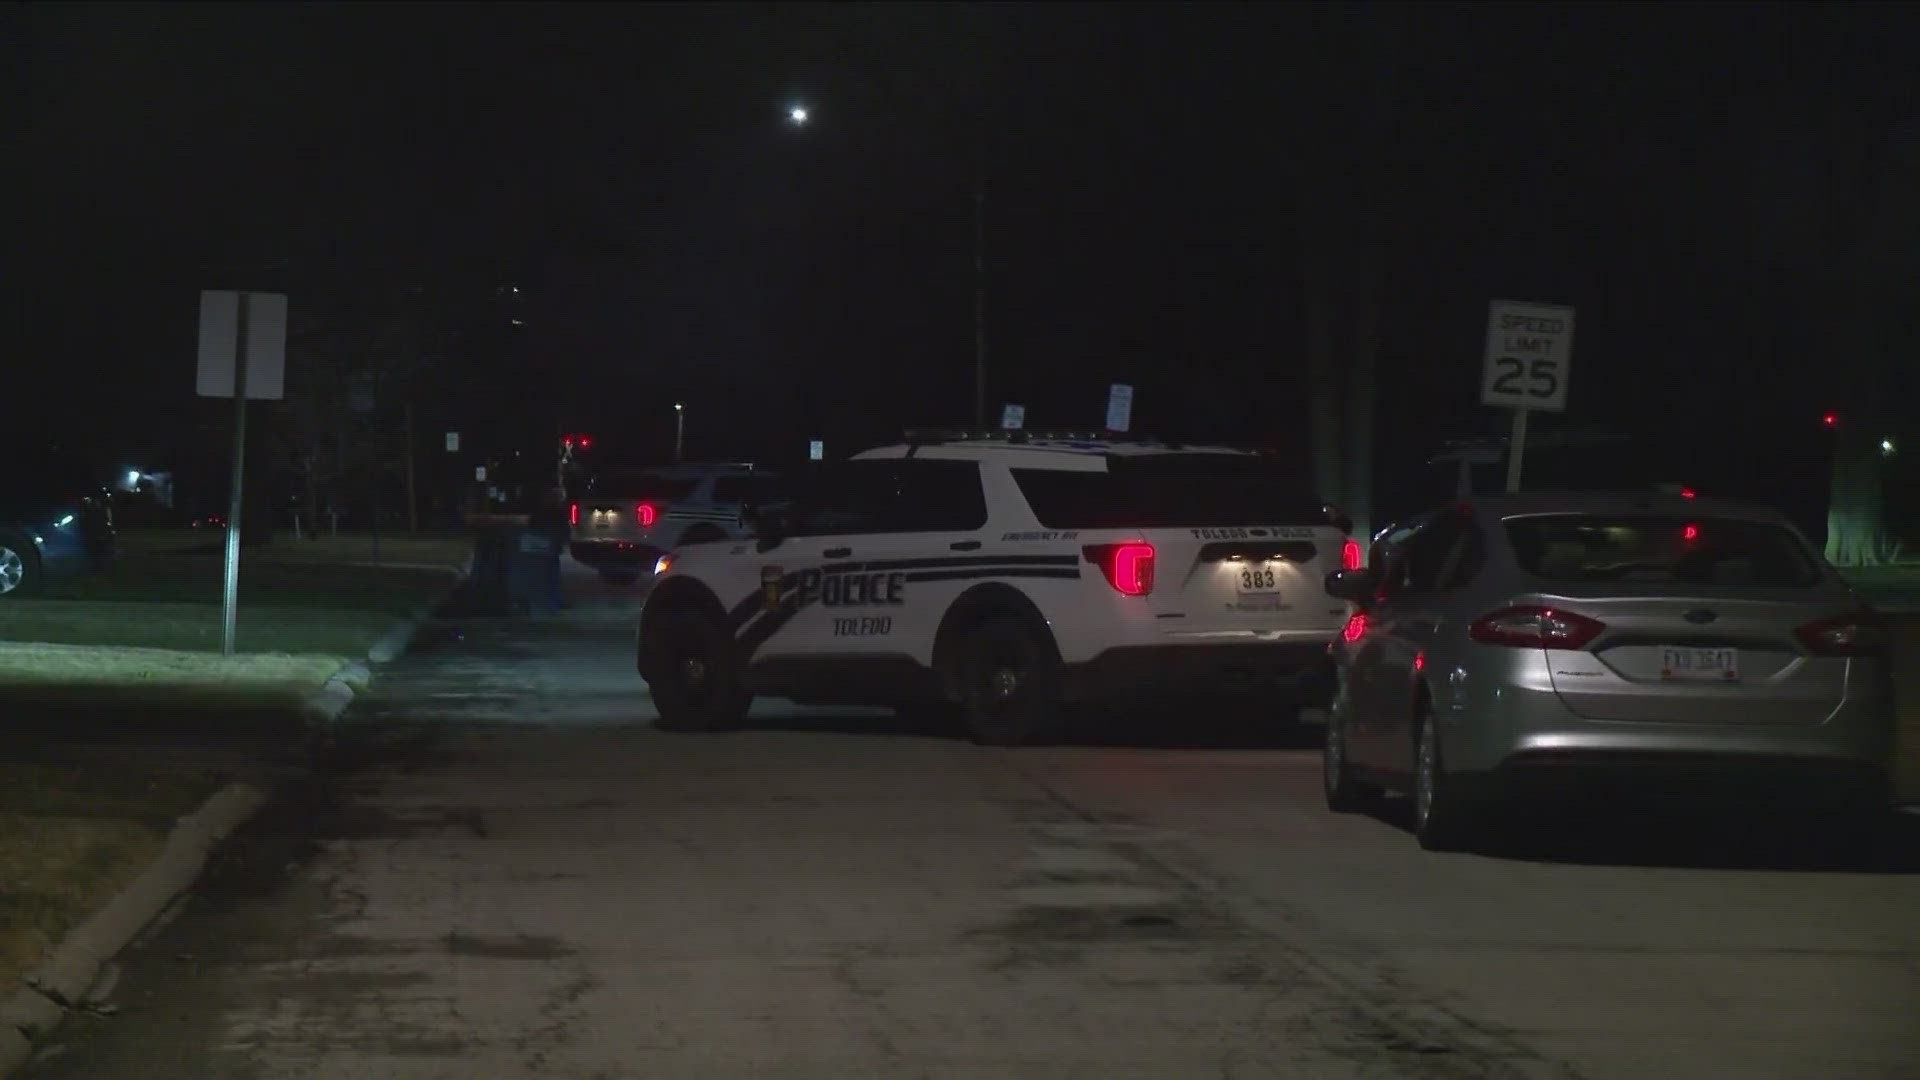 Toledo police tell WTOL 11 there was an altercation inside of a home and one man was shot.